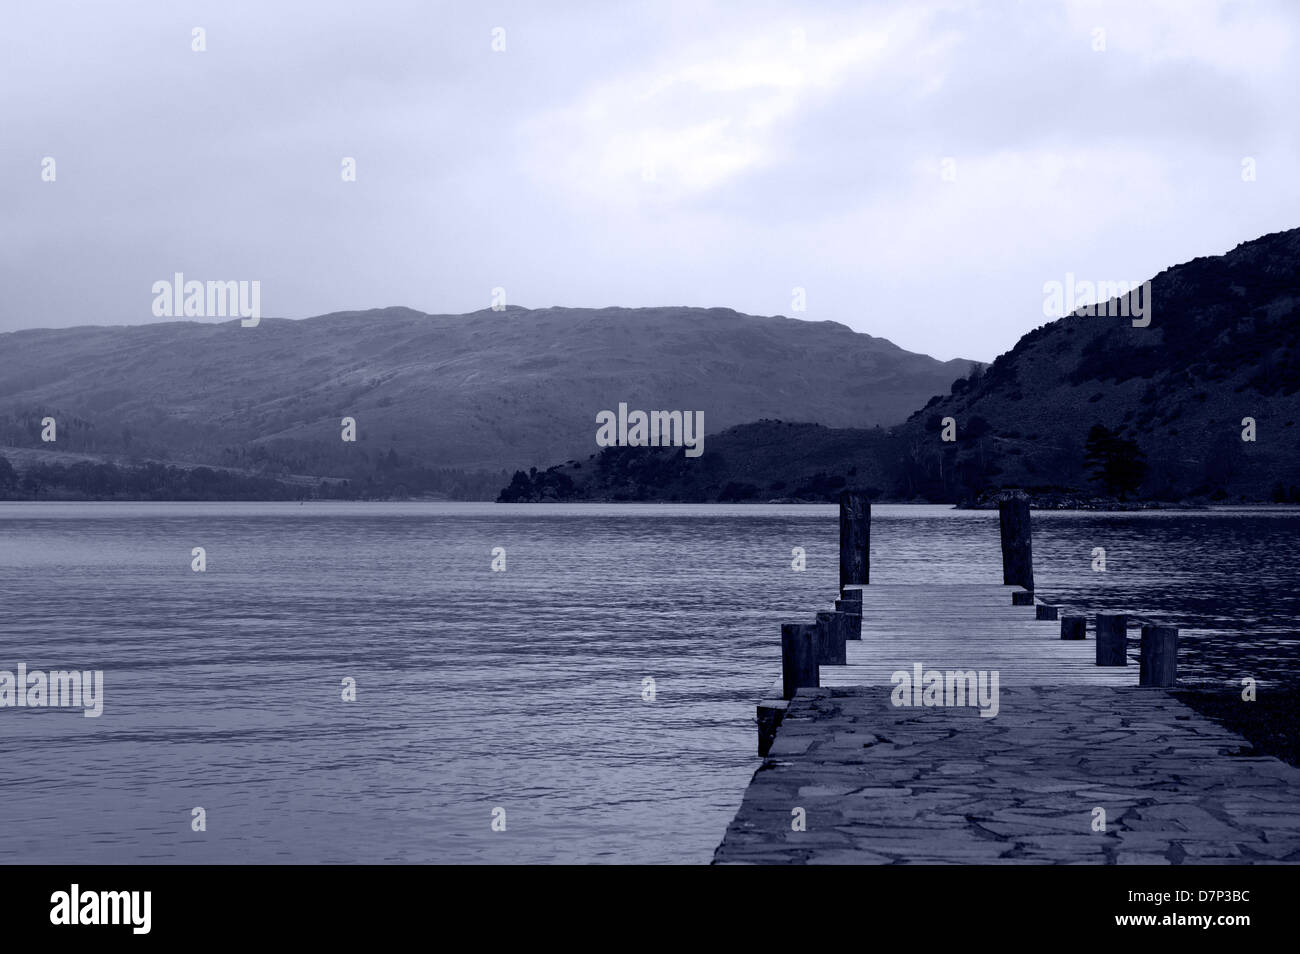 View of the Ullswater lake from the garden pier of the Inn On The Lake hotel, Lake District. Feb 2012 Stock Photo